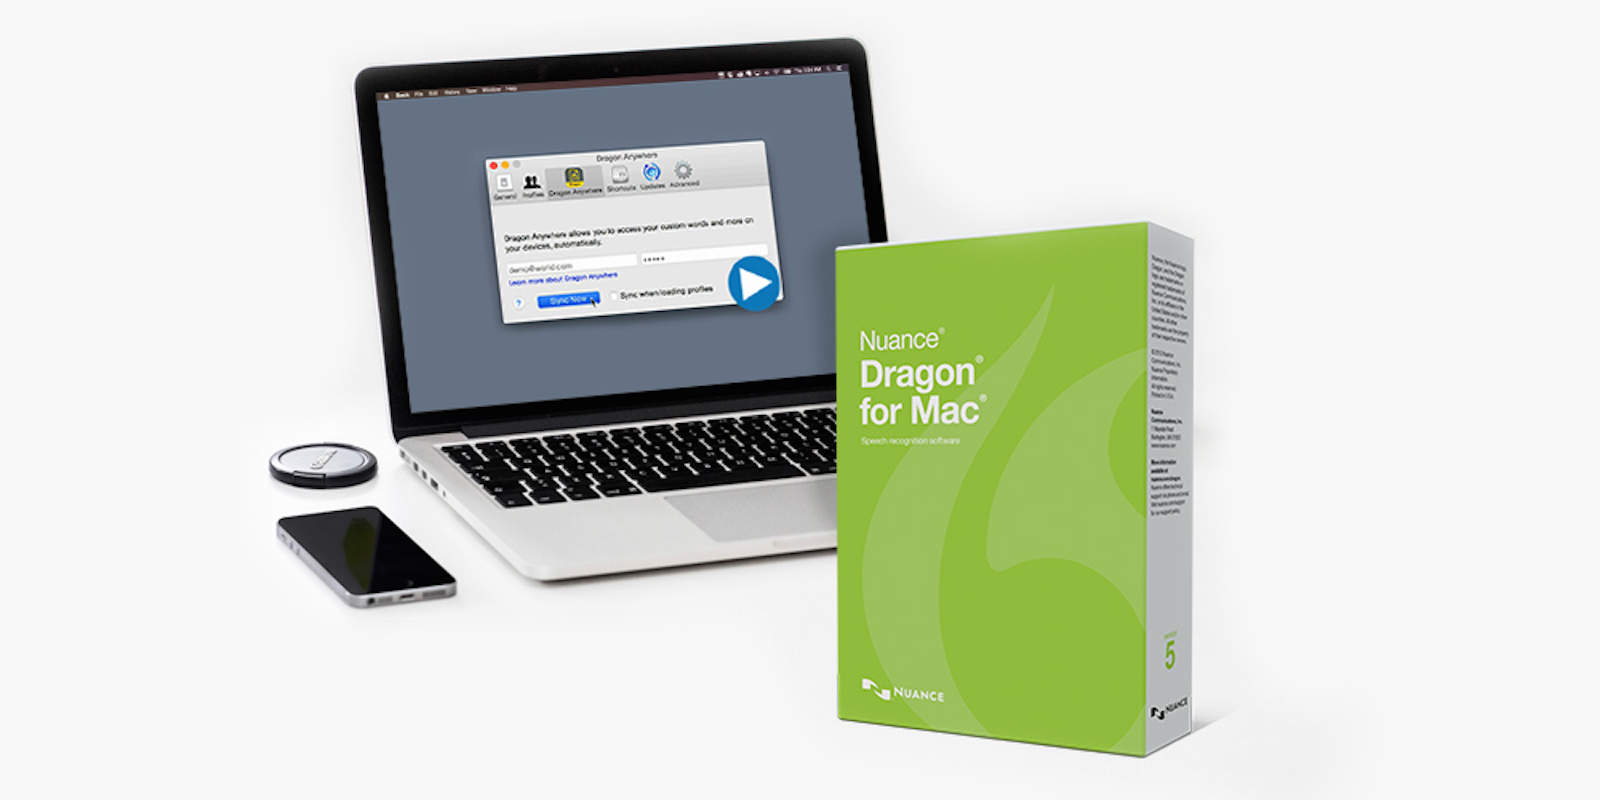 Dragon's latest version comes with all new features for easily and instantly converting speech to text.